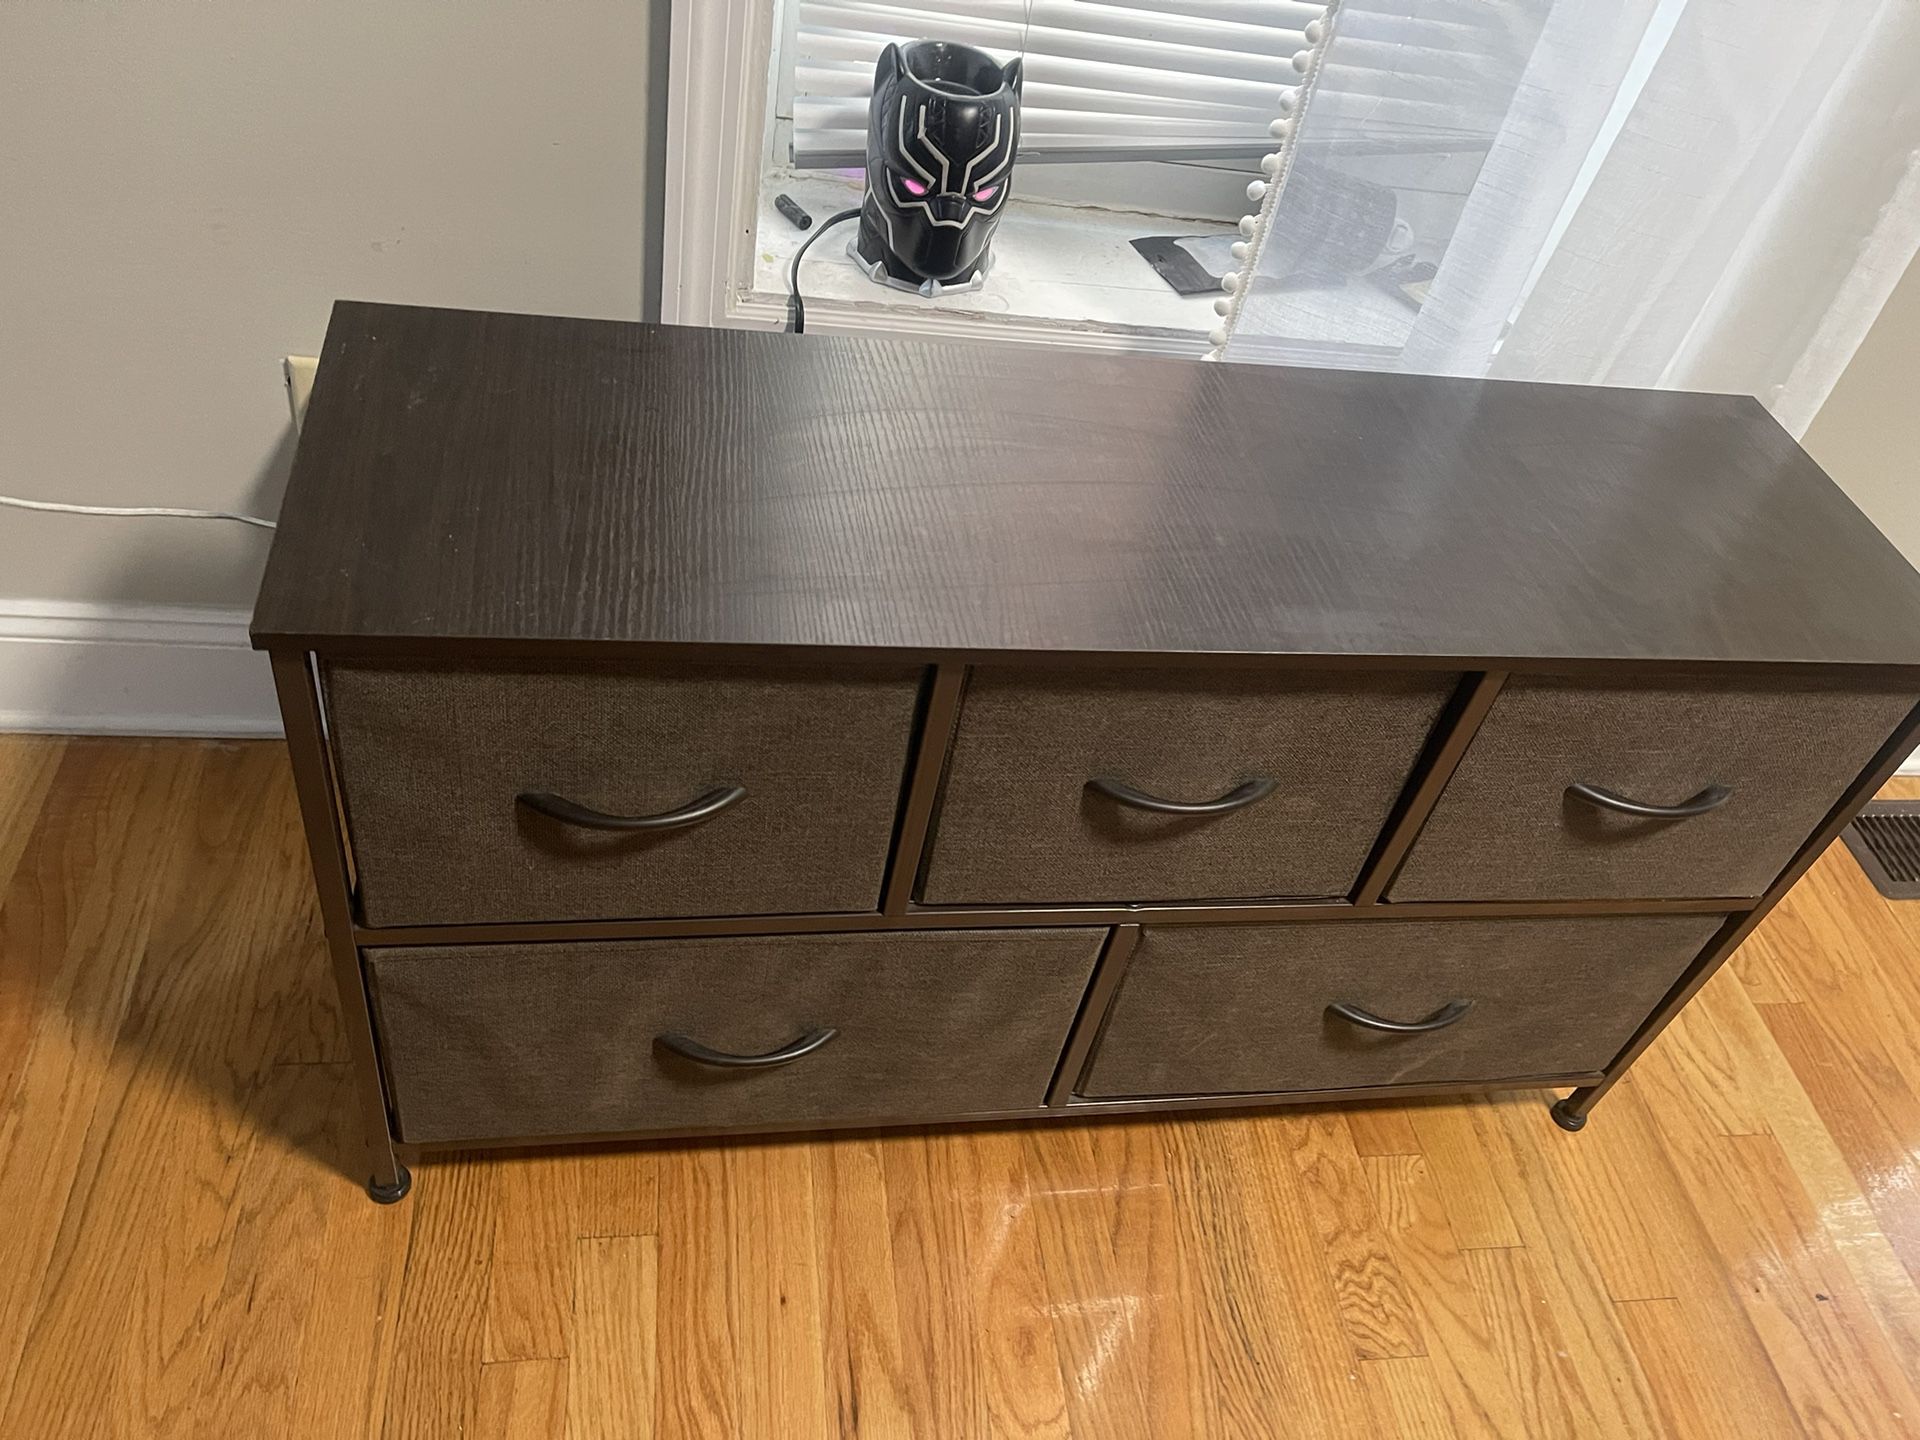 21x12” Drawer Vertical Storage Dresser with Cast Iron Frame, Wood Top, and Easy Pull Fabric Drawers with Wooden Handles (Brown) 